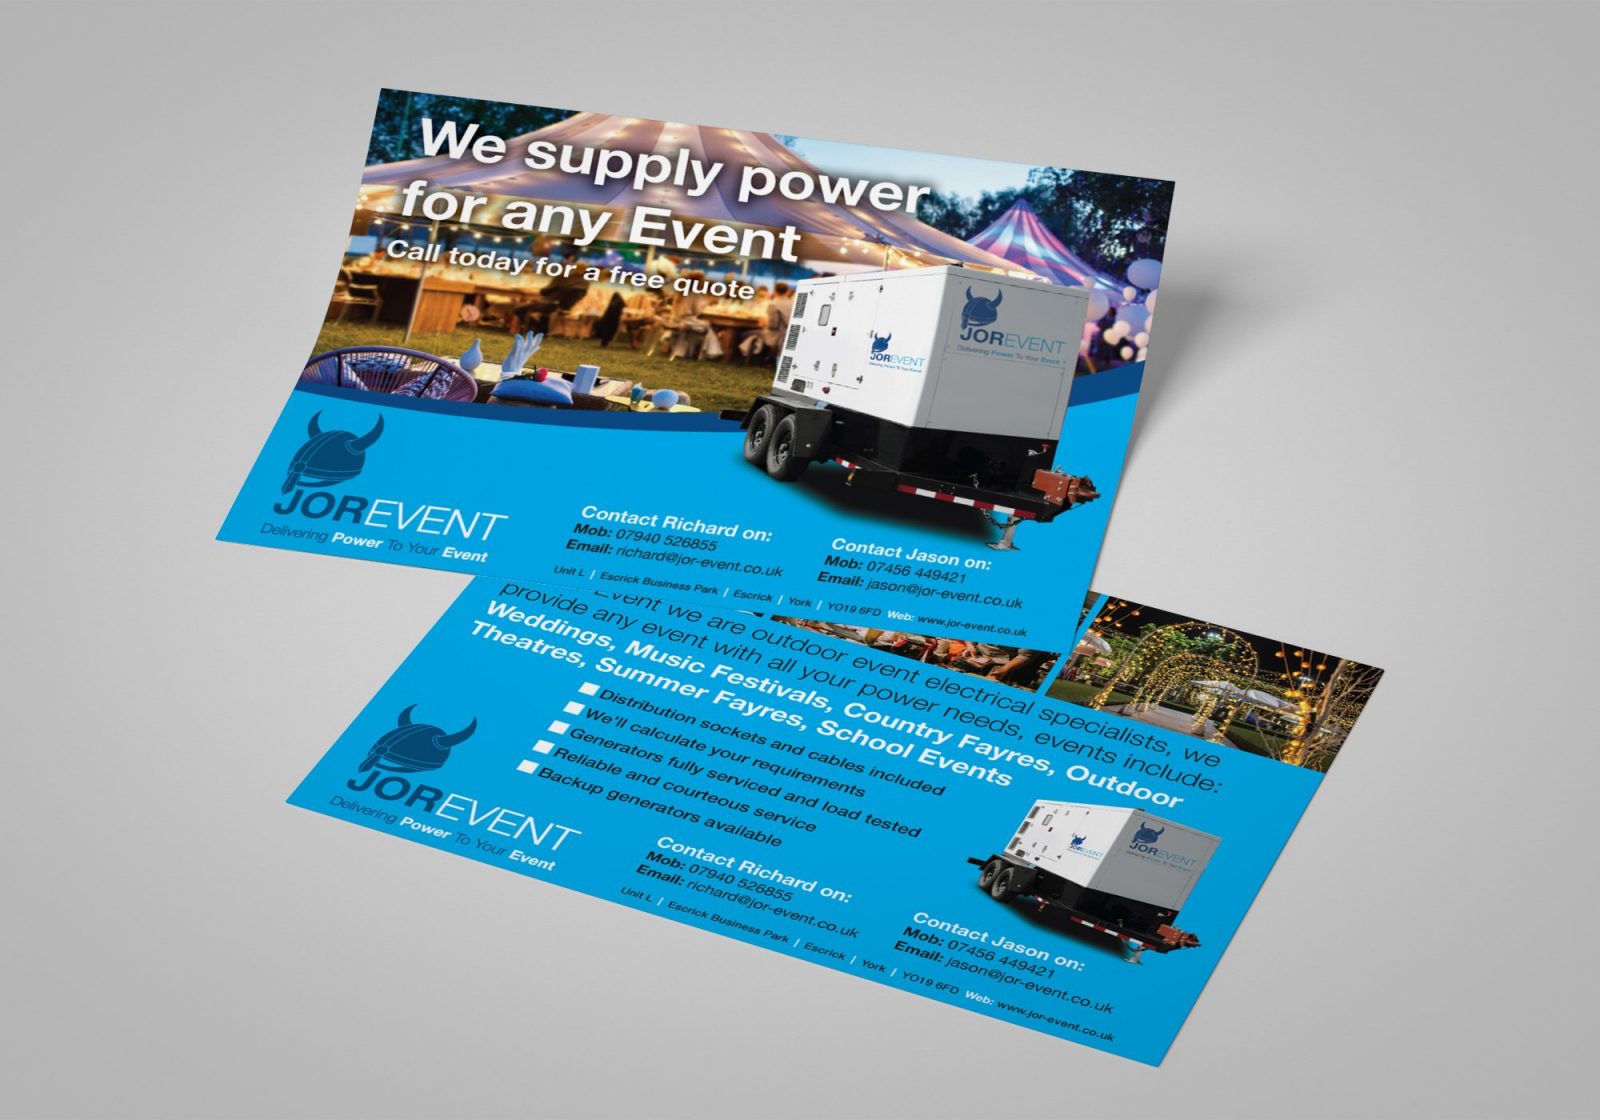 An A5 double sided flyer for Jor-Event generator hire